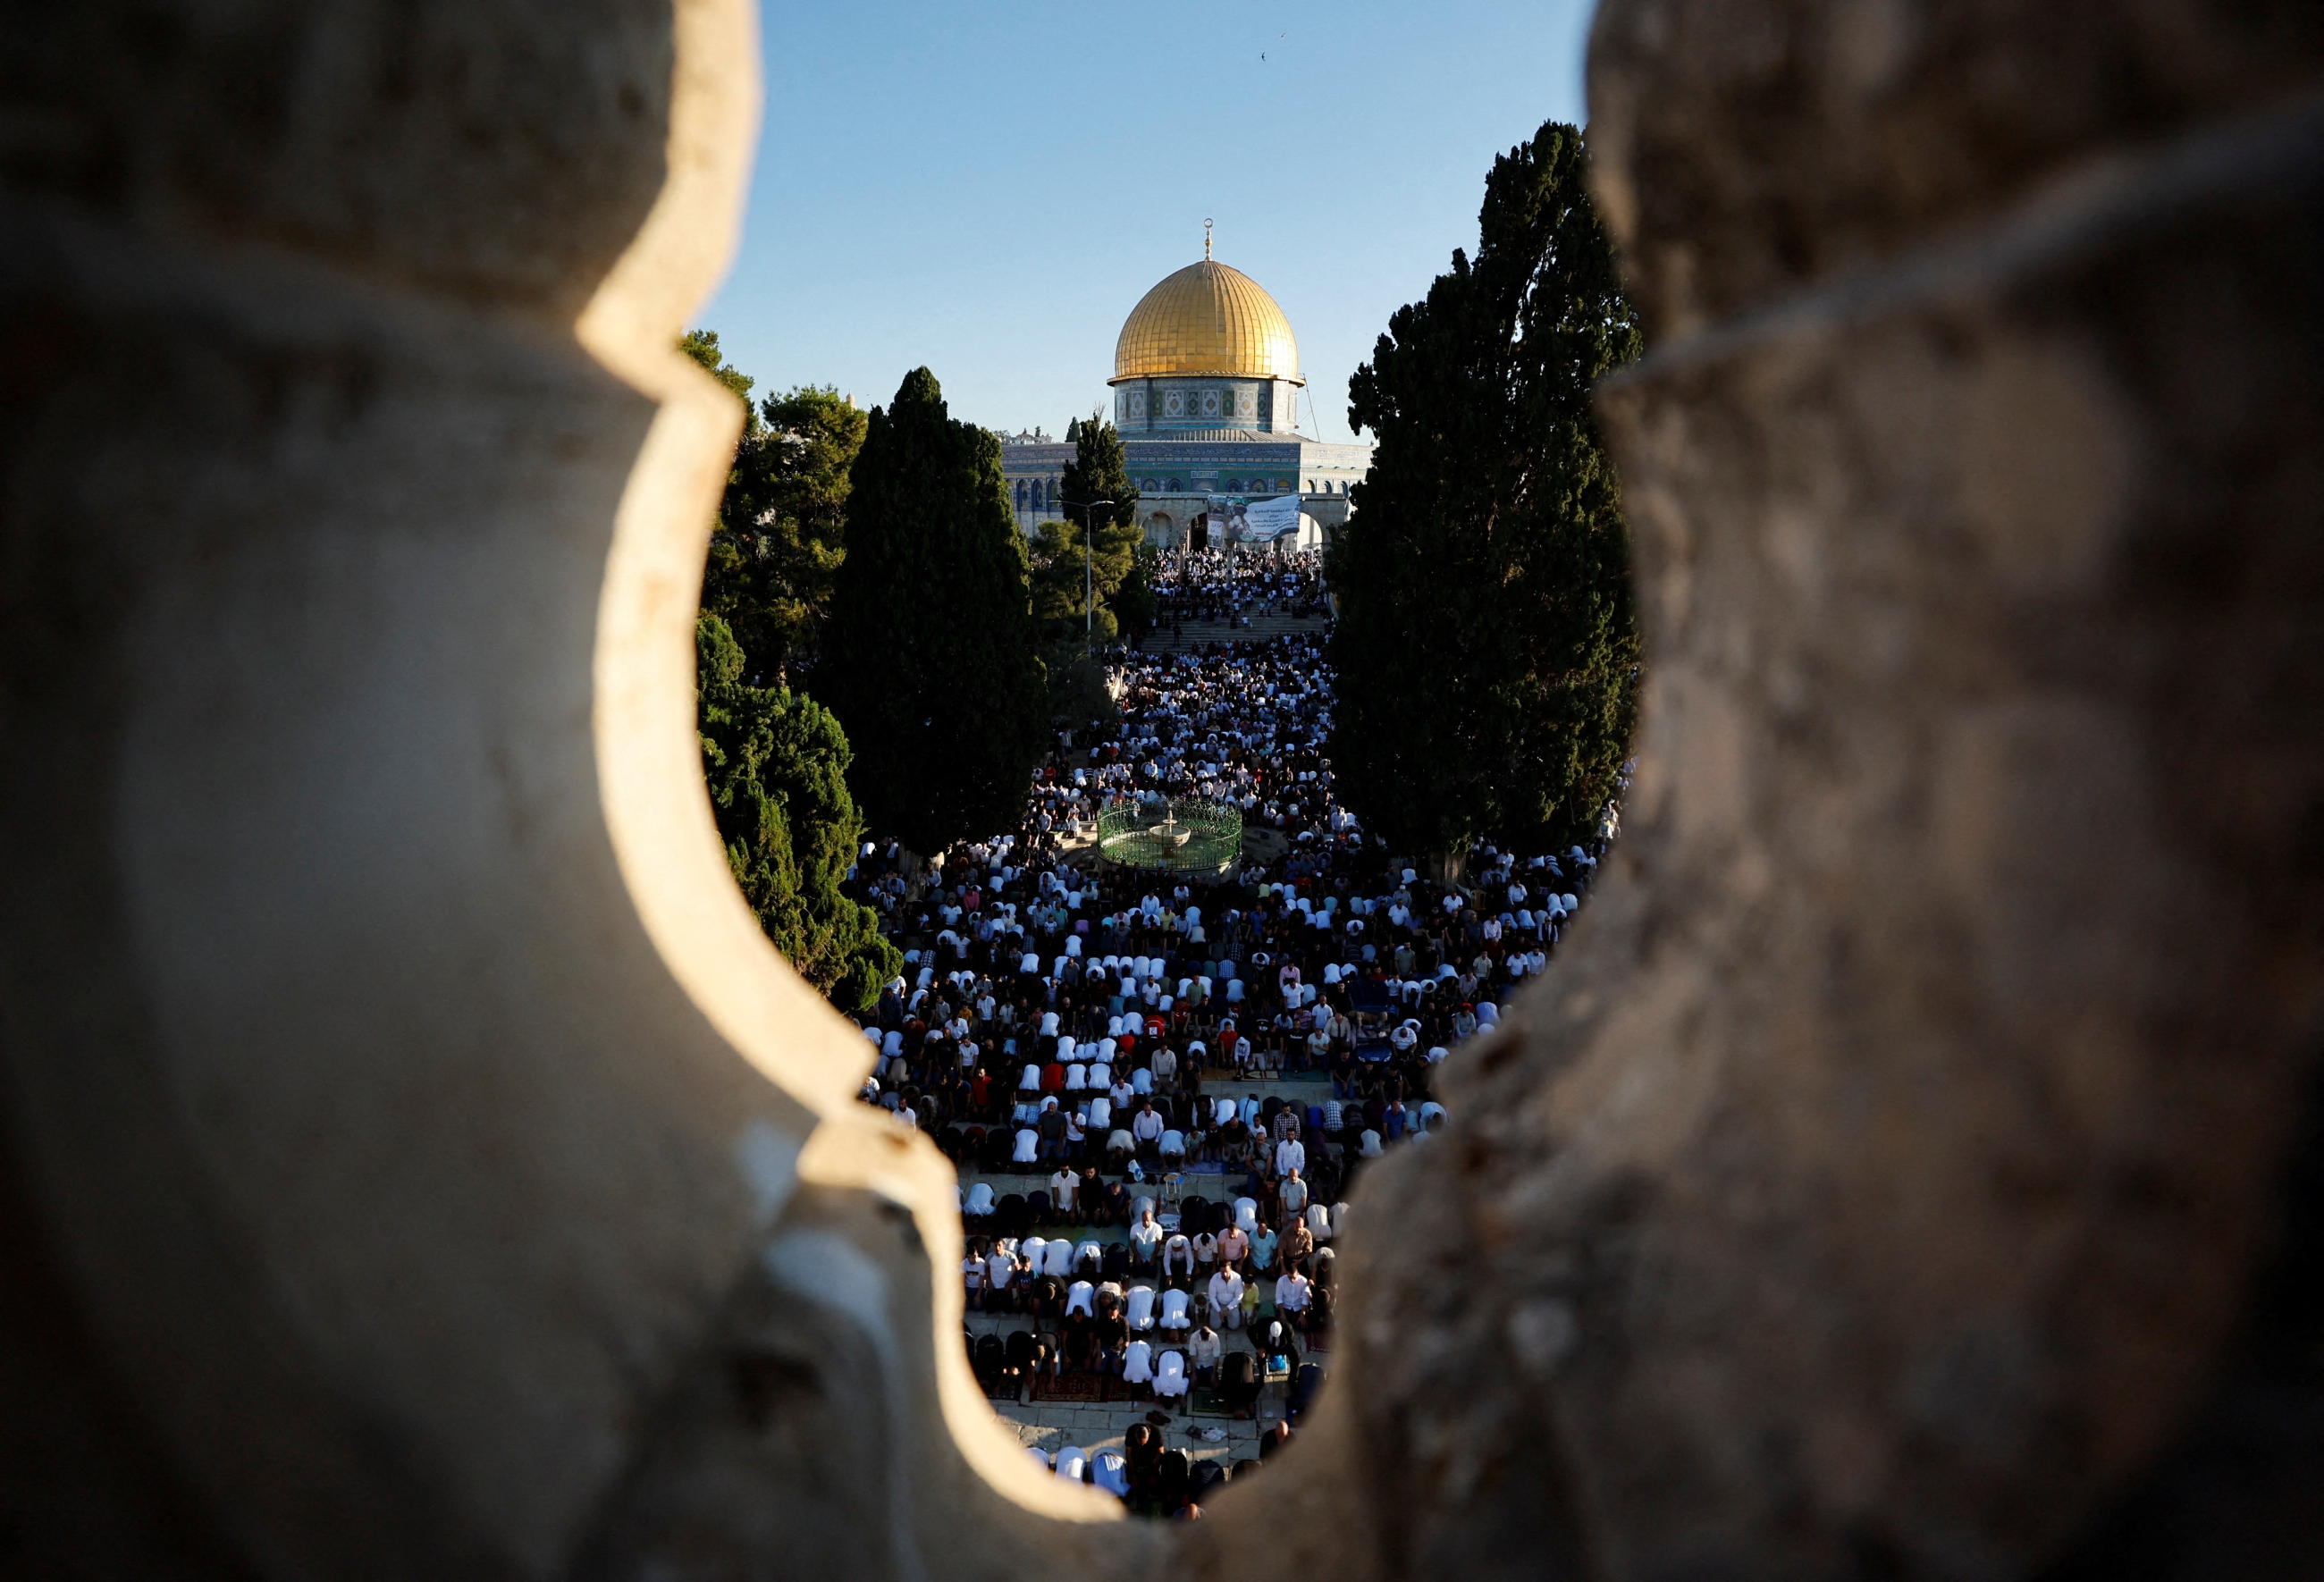 Palestinians pray on the first day of Muslim holiday of Eid al-Adha in al-Aqsa Mosque in Jerusalem's Old City, 9 July 2022 (Reuters)